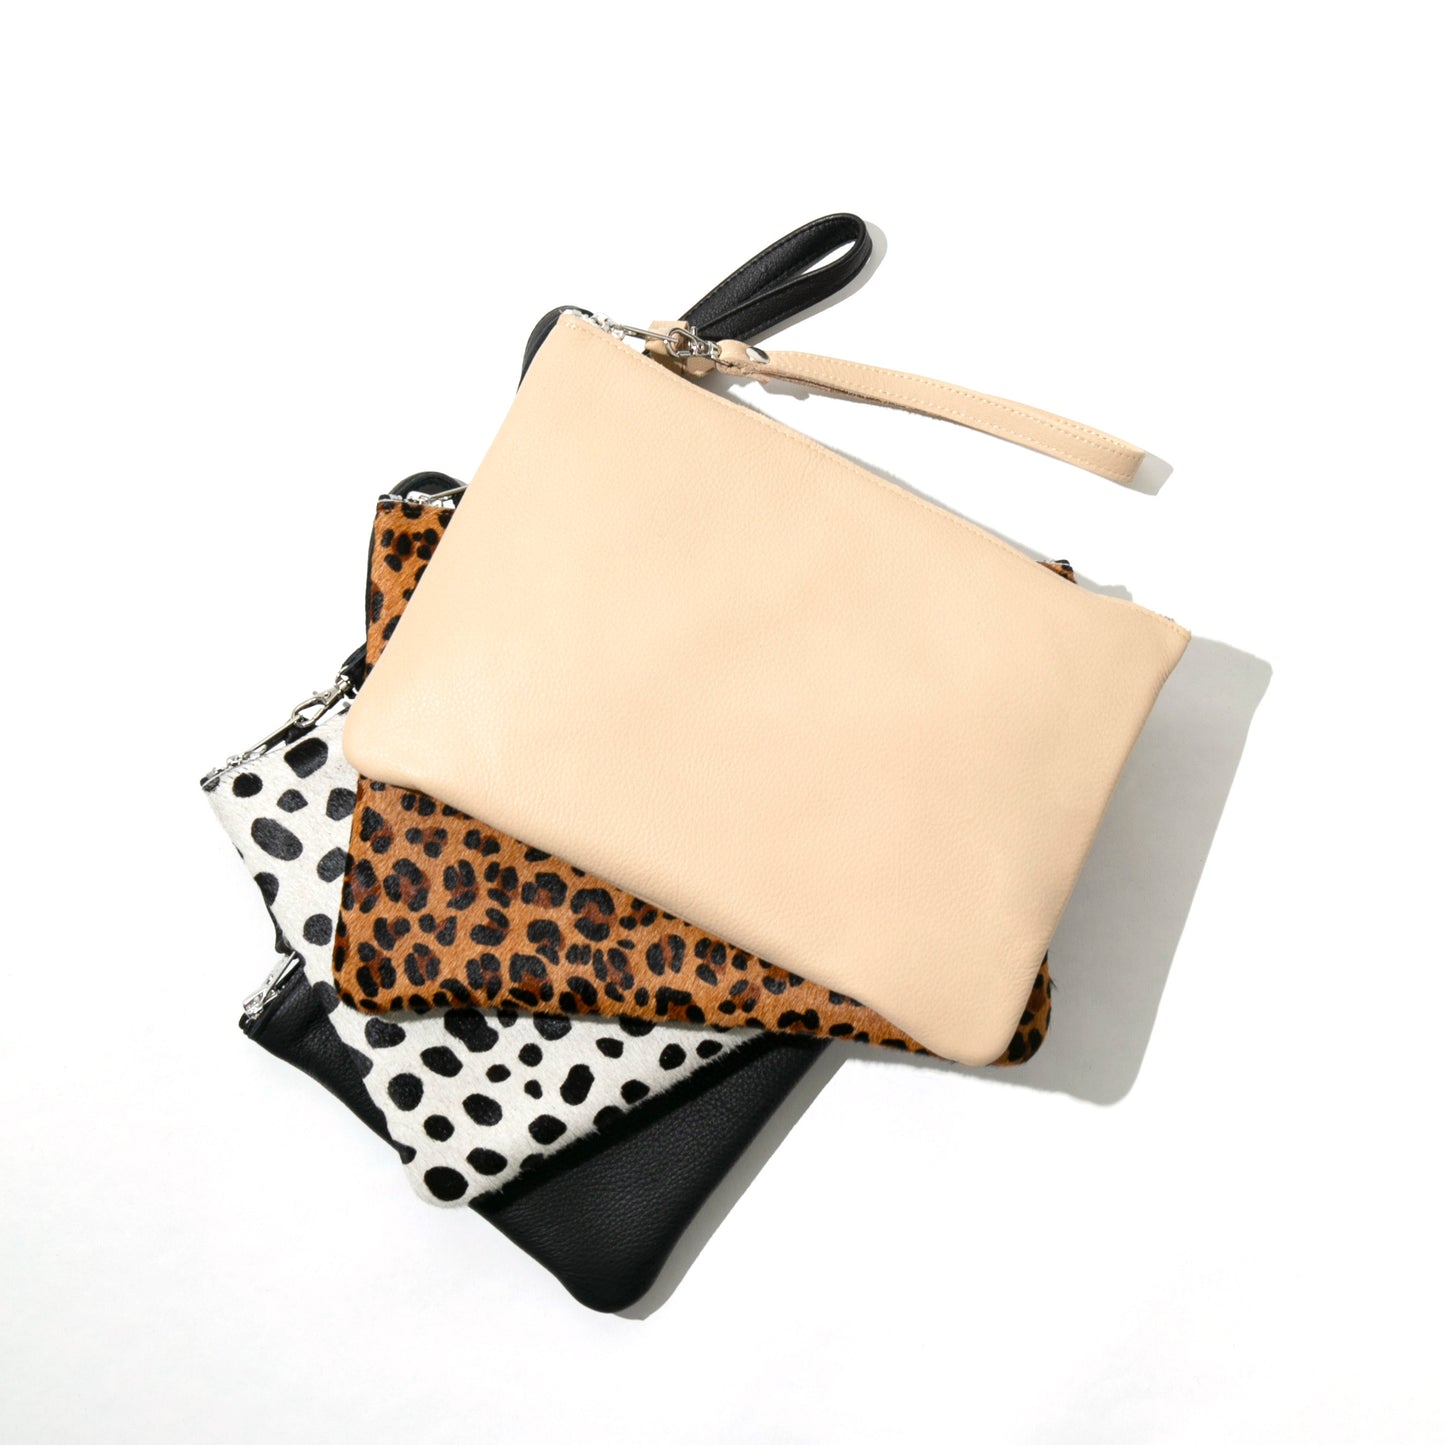 Beige Leather Clutch